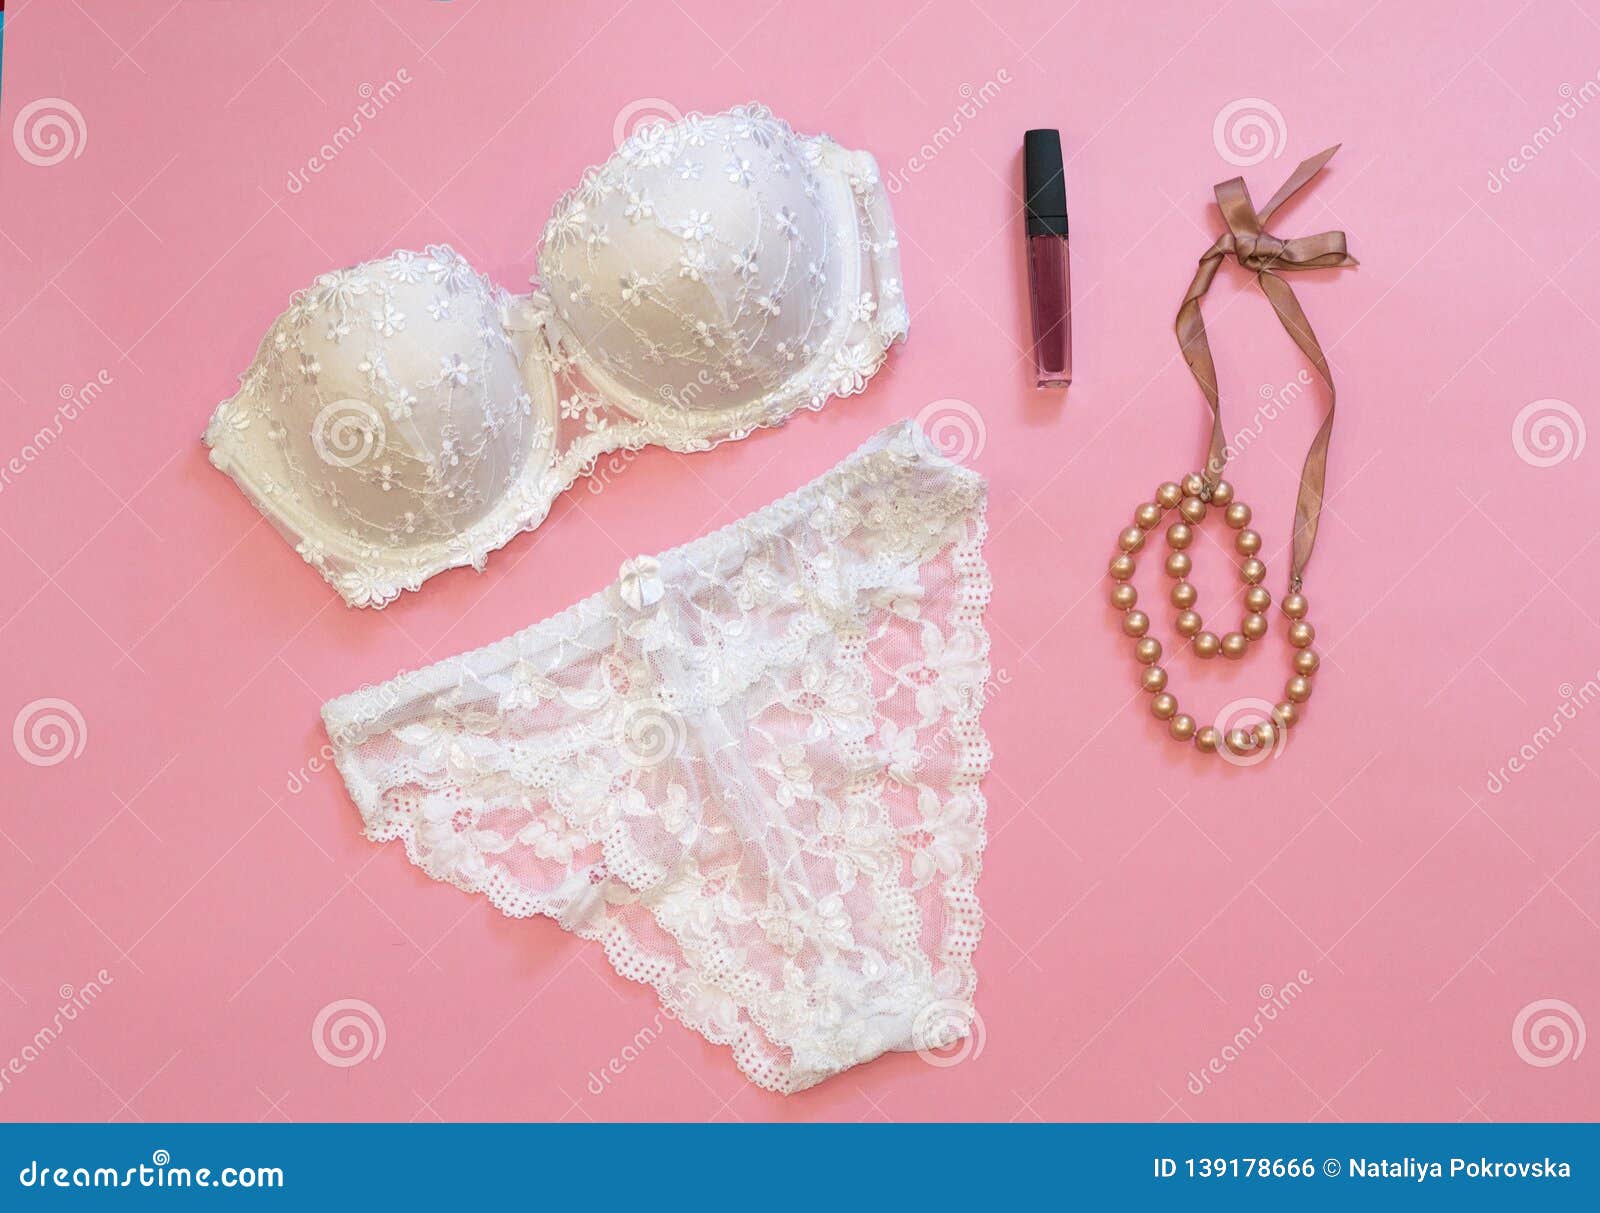 https://thumbs.dreamstime.com/z/white-lacery-lingerie-near-lipstick-necklace-pink-background-woman-underwear-special-occasions-composition-beauty-blog-139178666.jpg